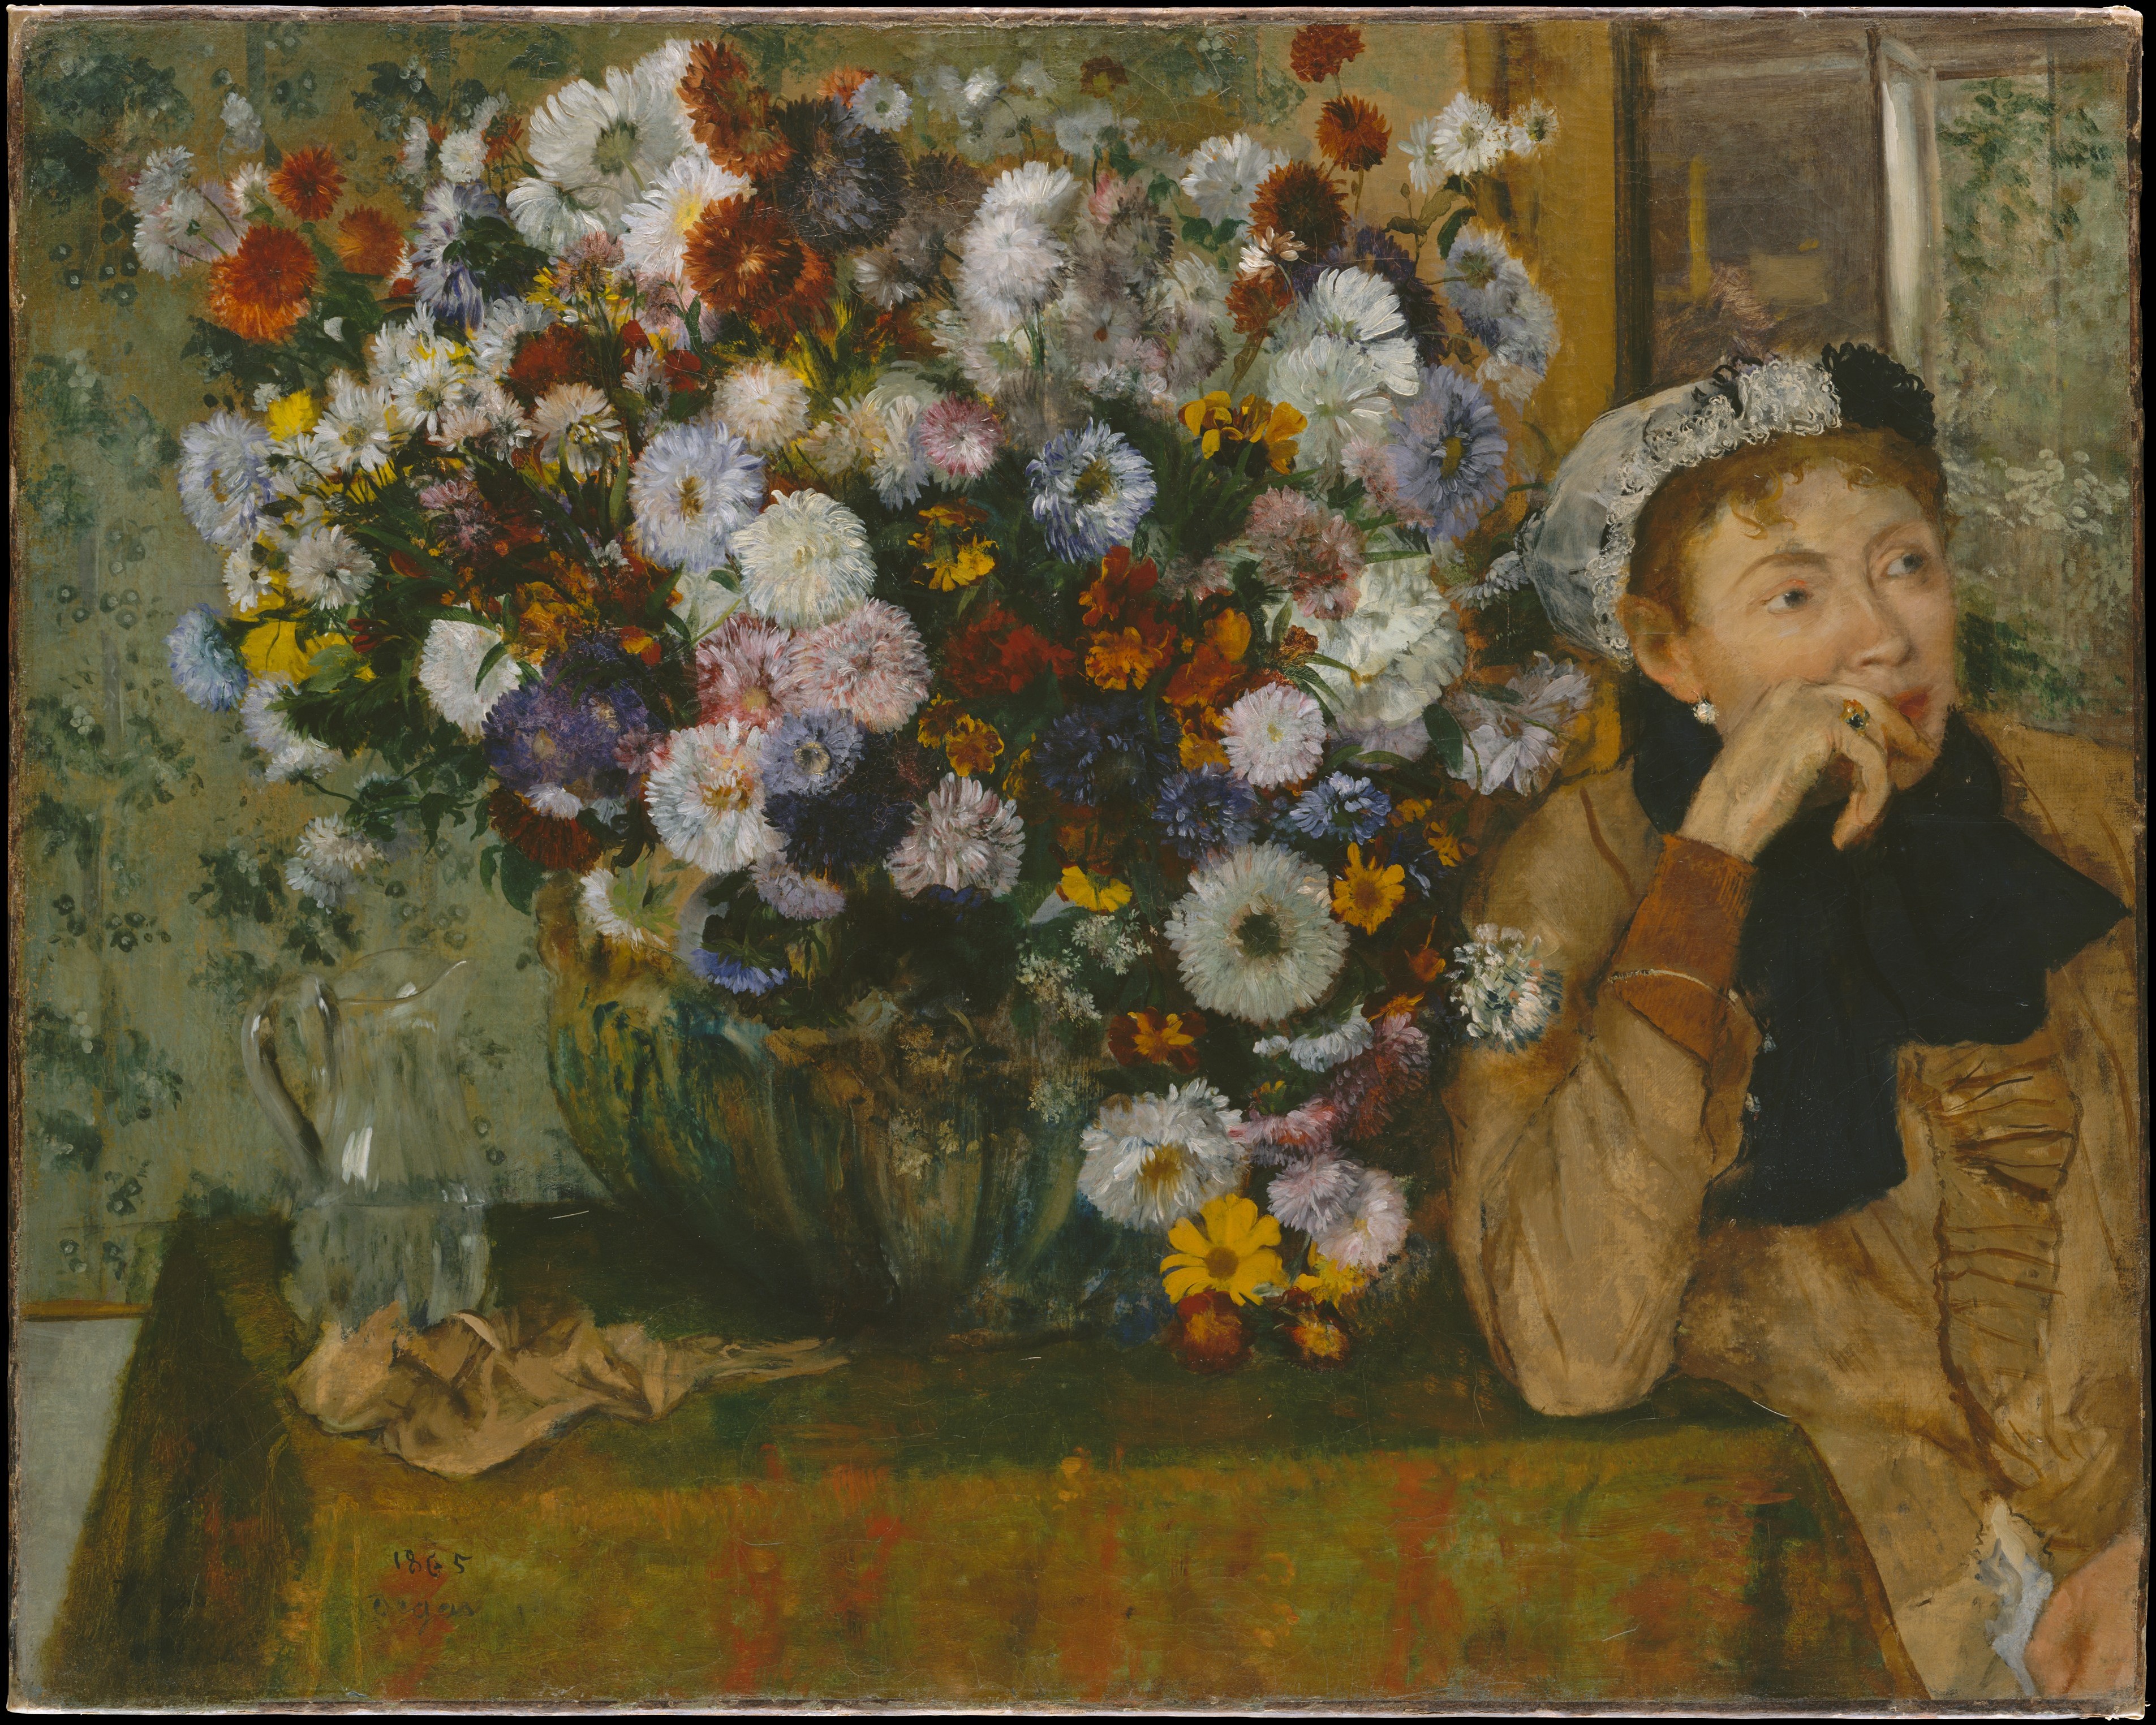 A Woman Seated beside a Vase of Flowers 1865